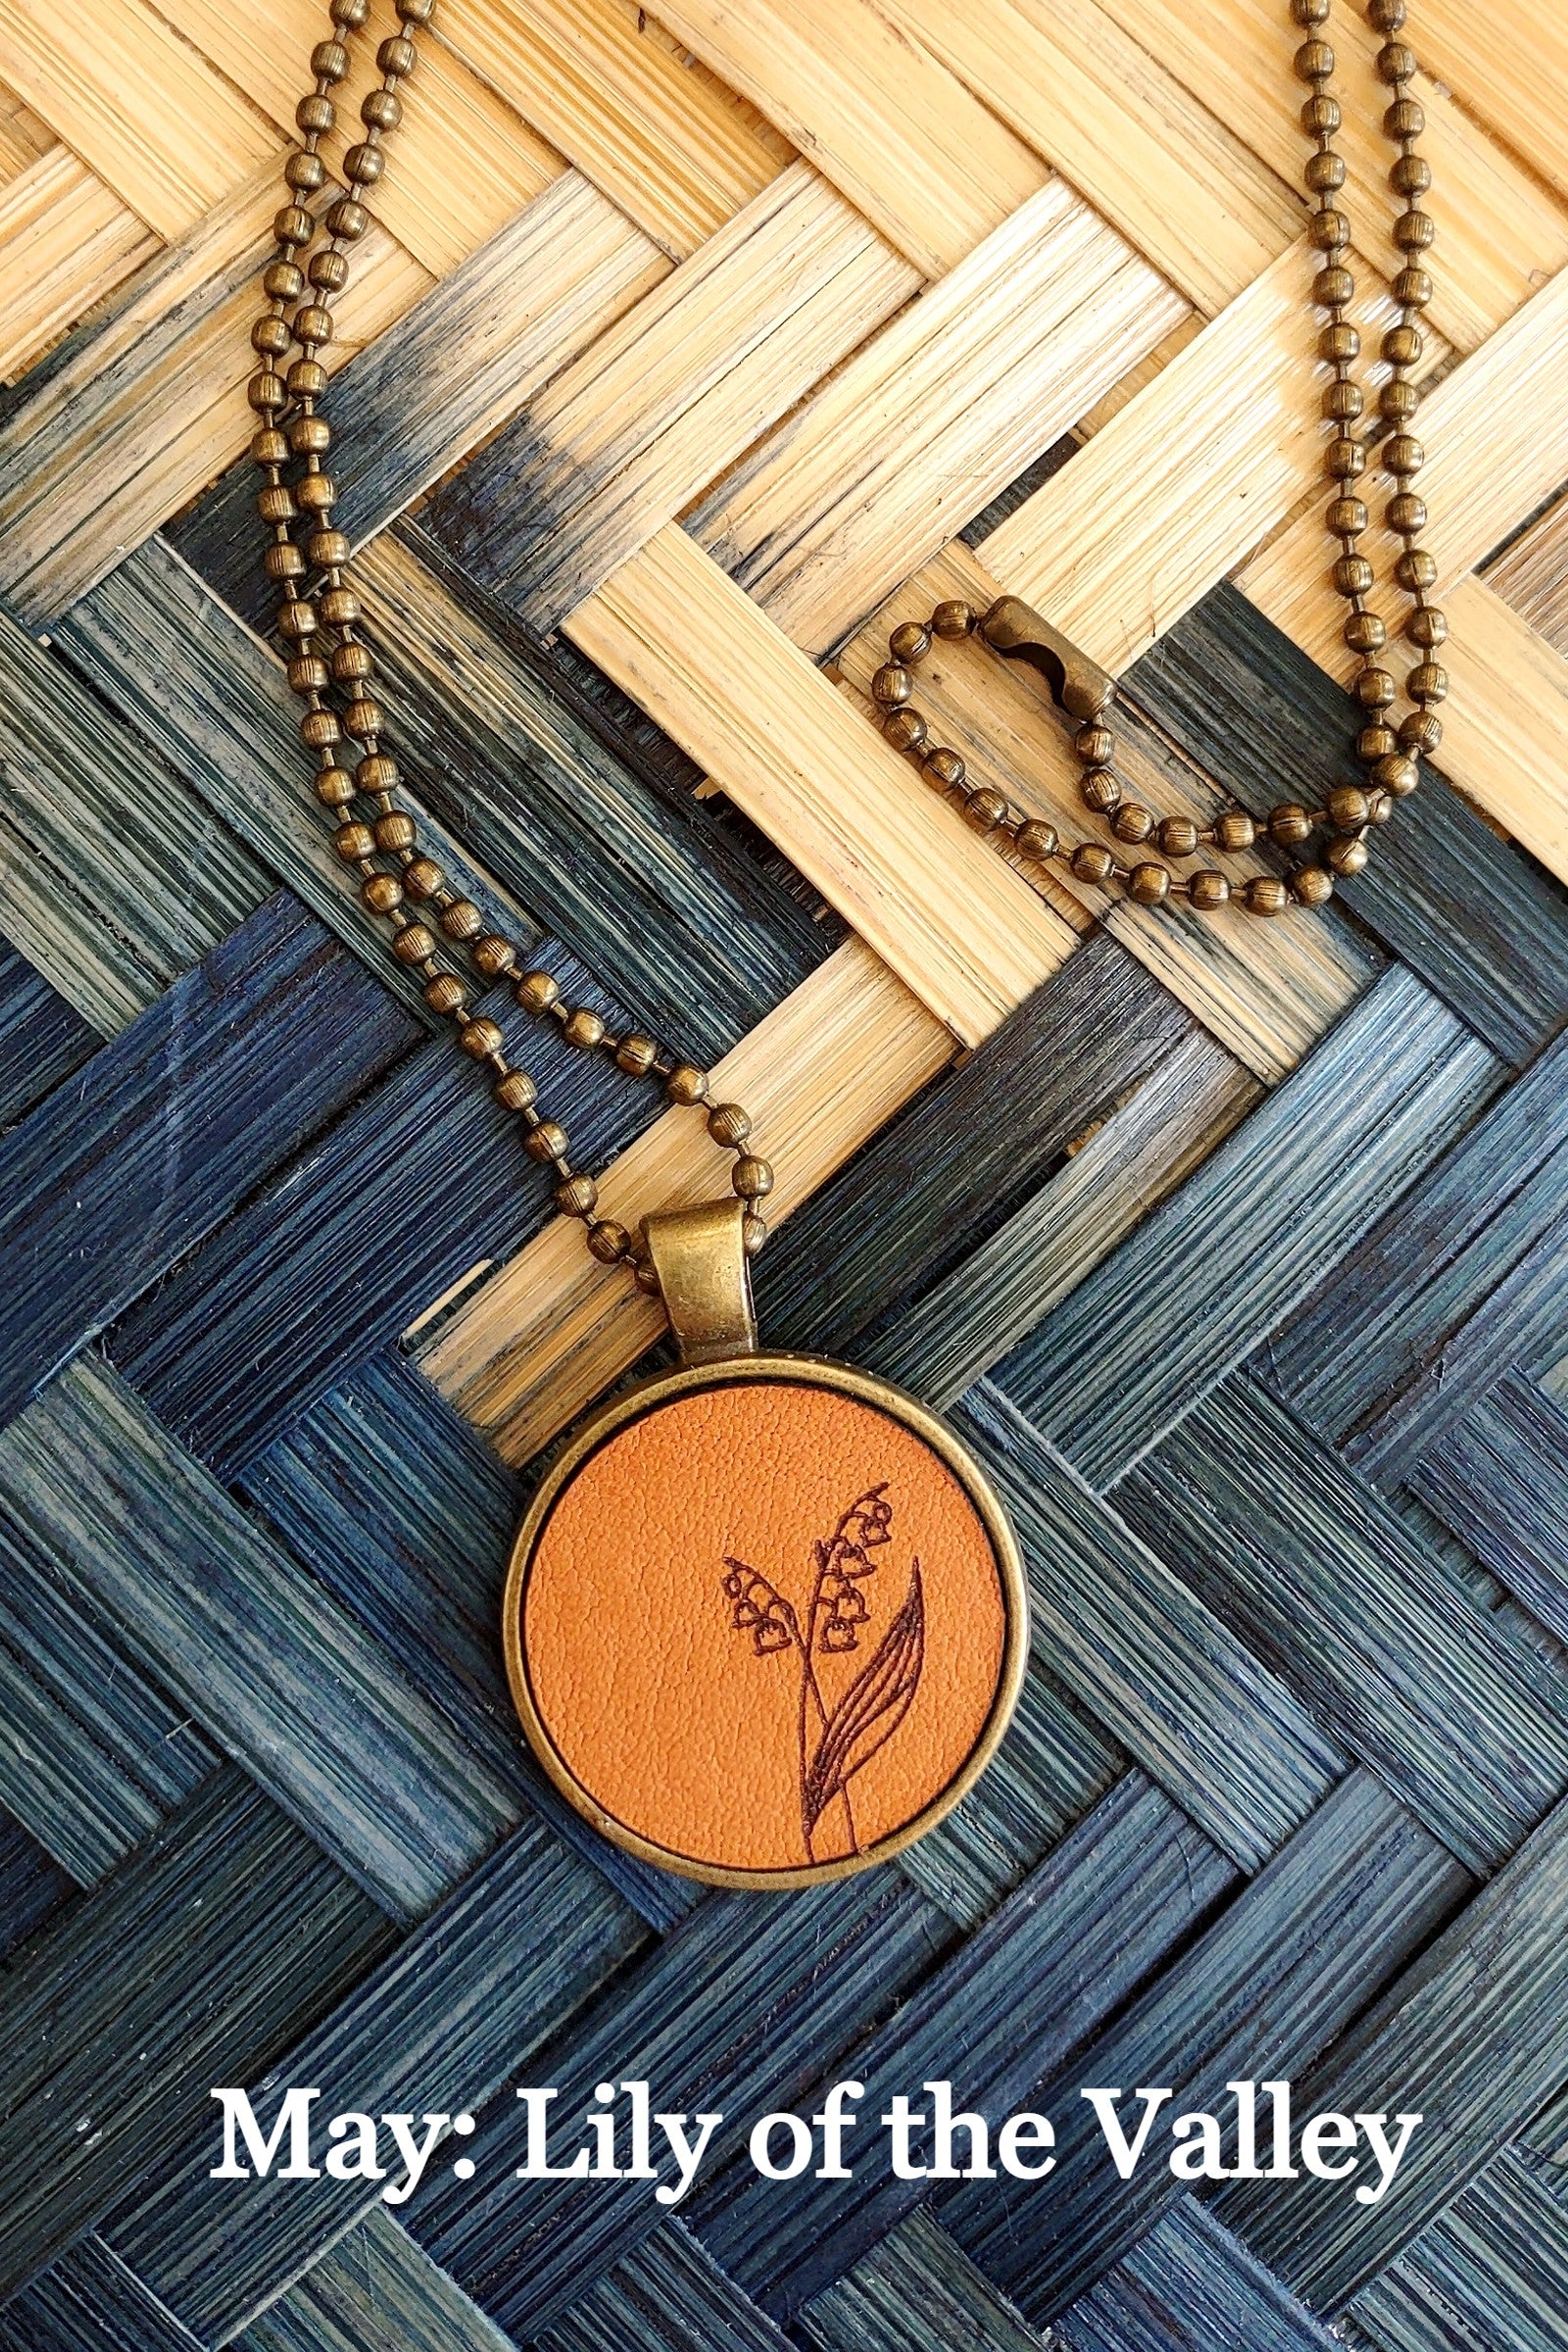 Birth Month Flower Leather Pendant Necklace